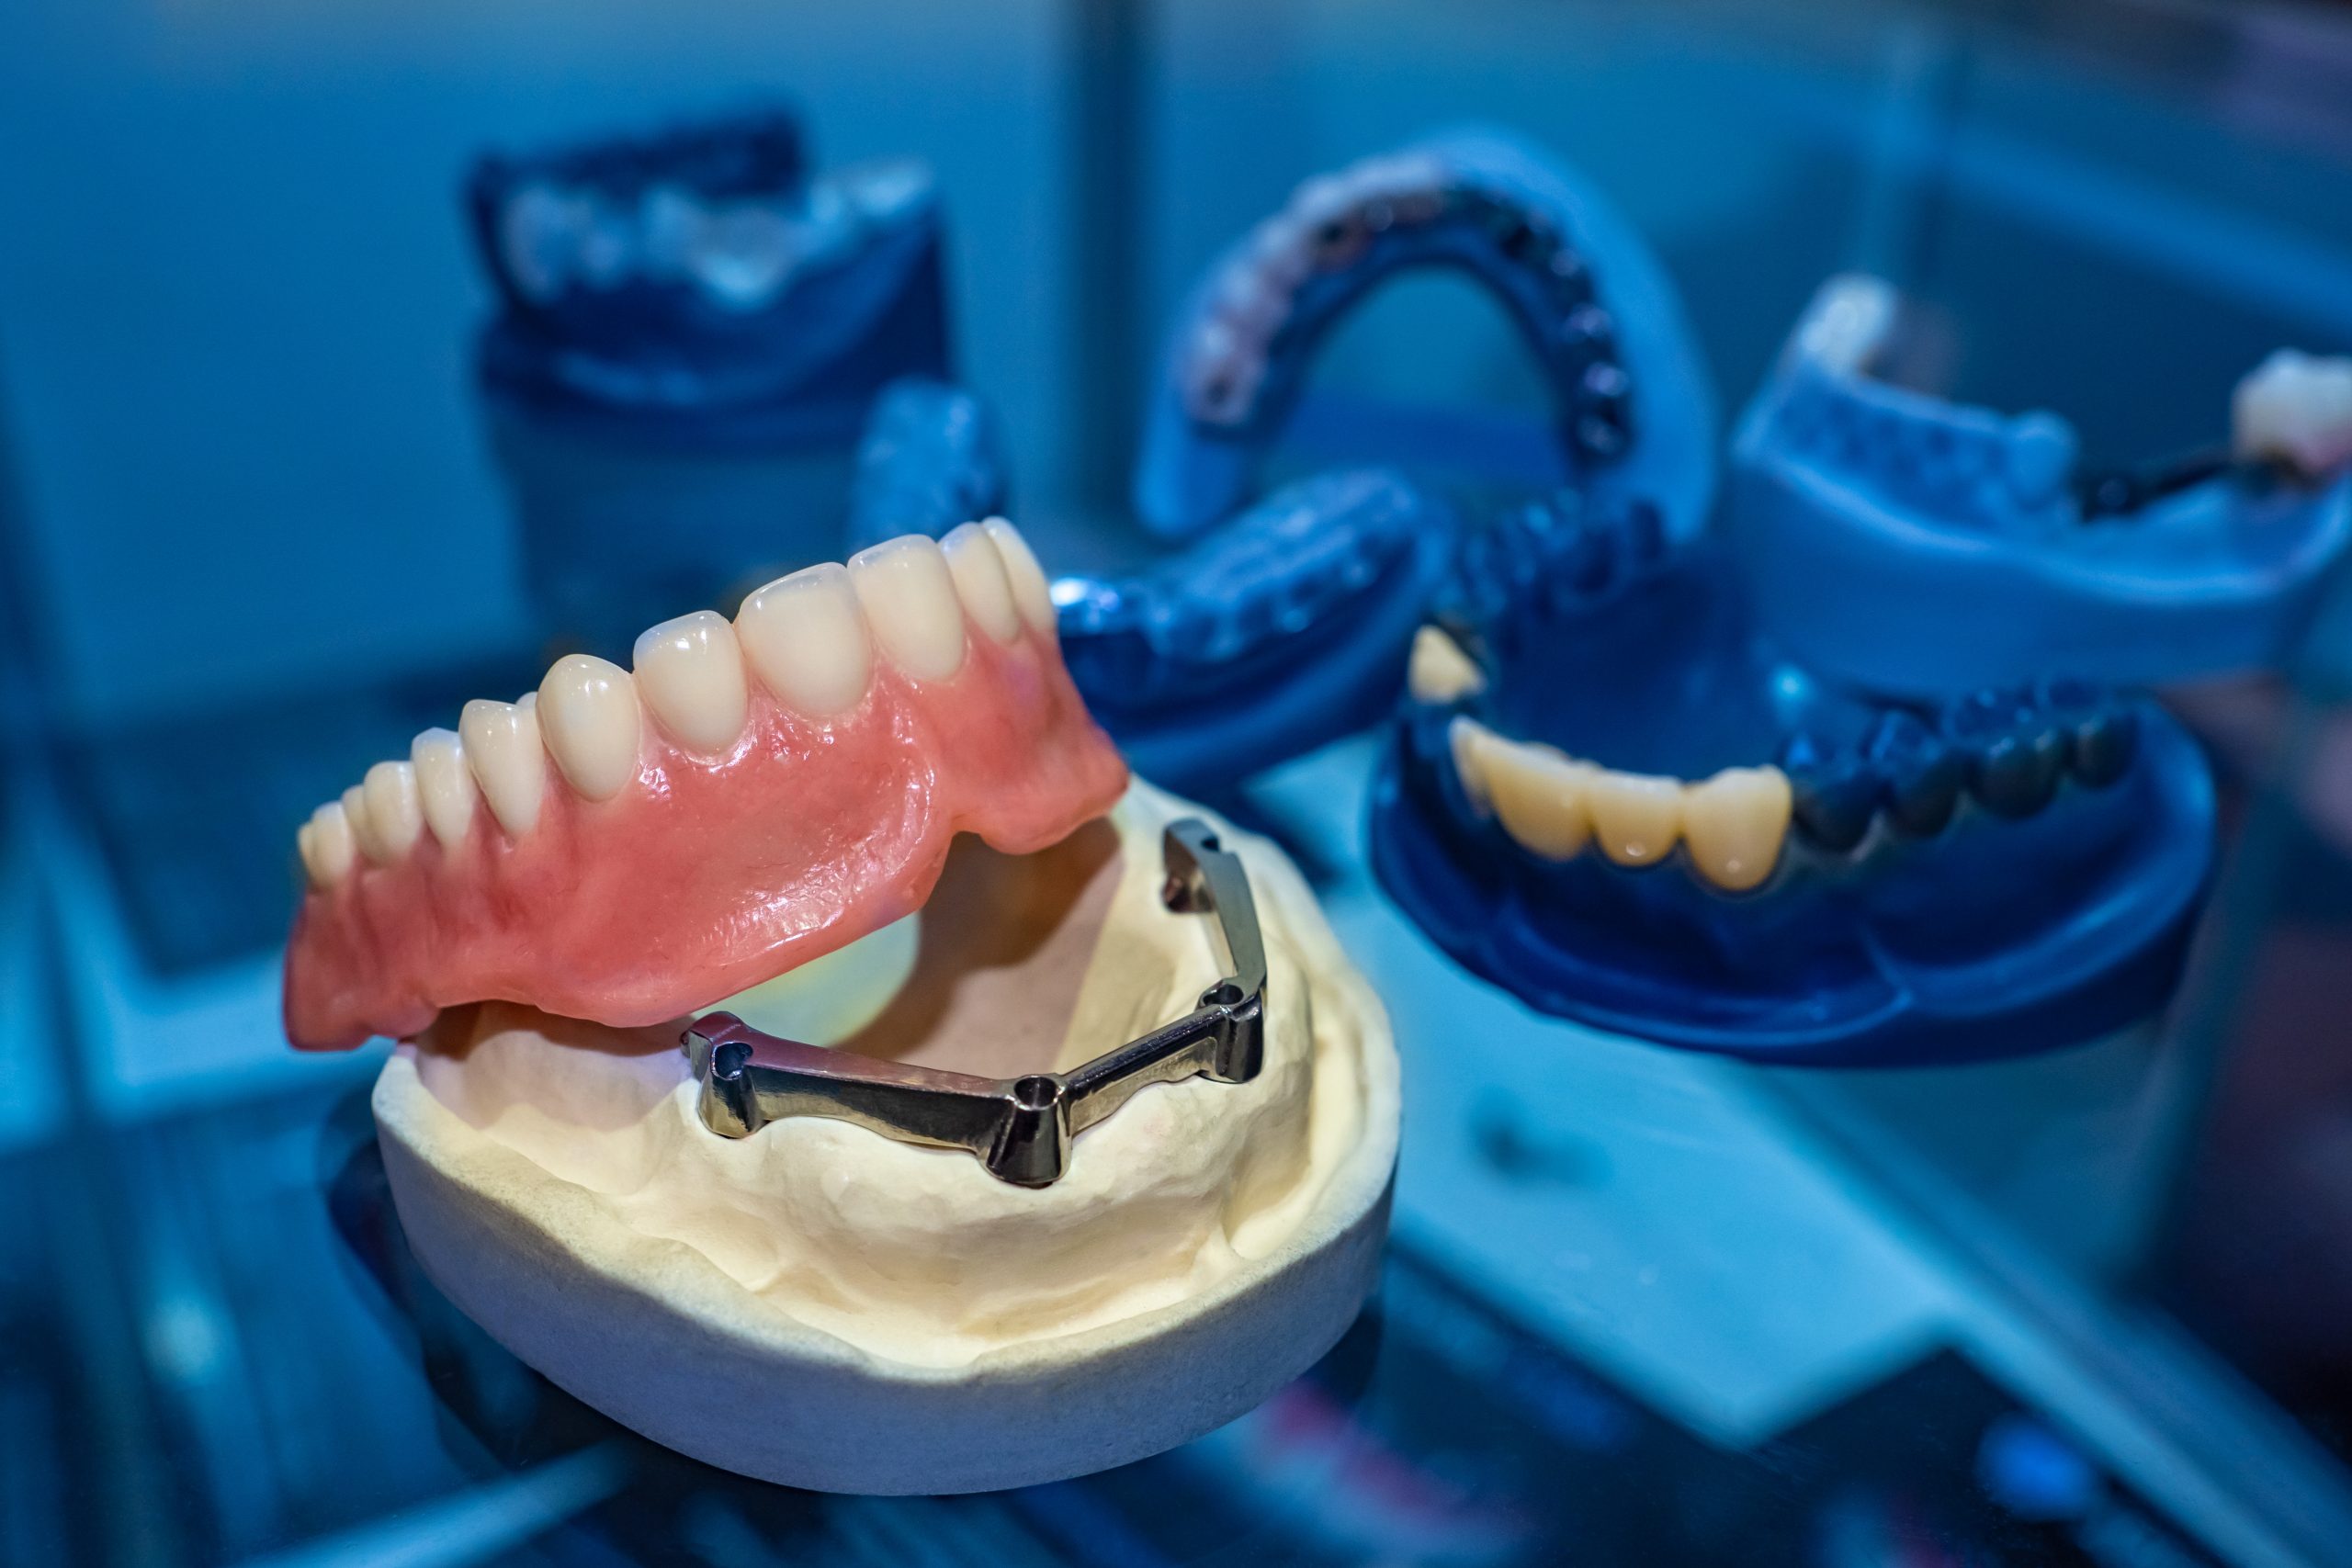 image of a dental implant denture on a prosthesis jaw in a dark and blue aesthetic dental room